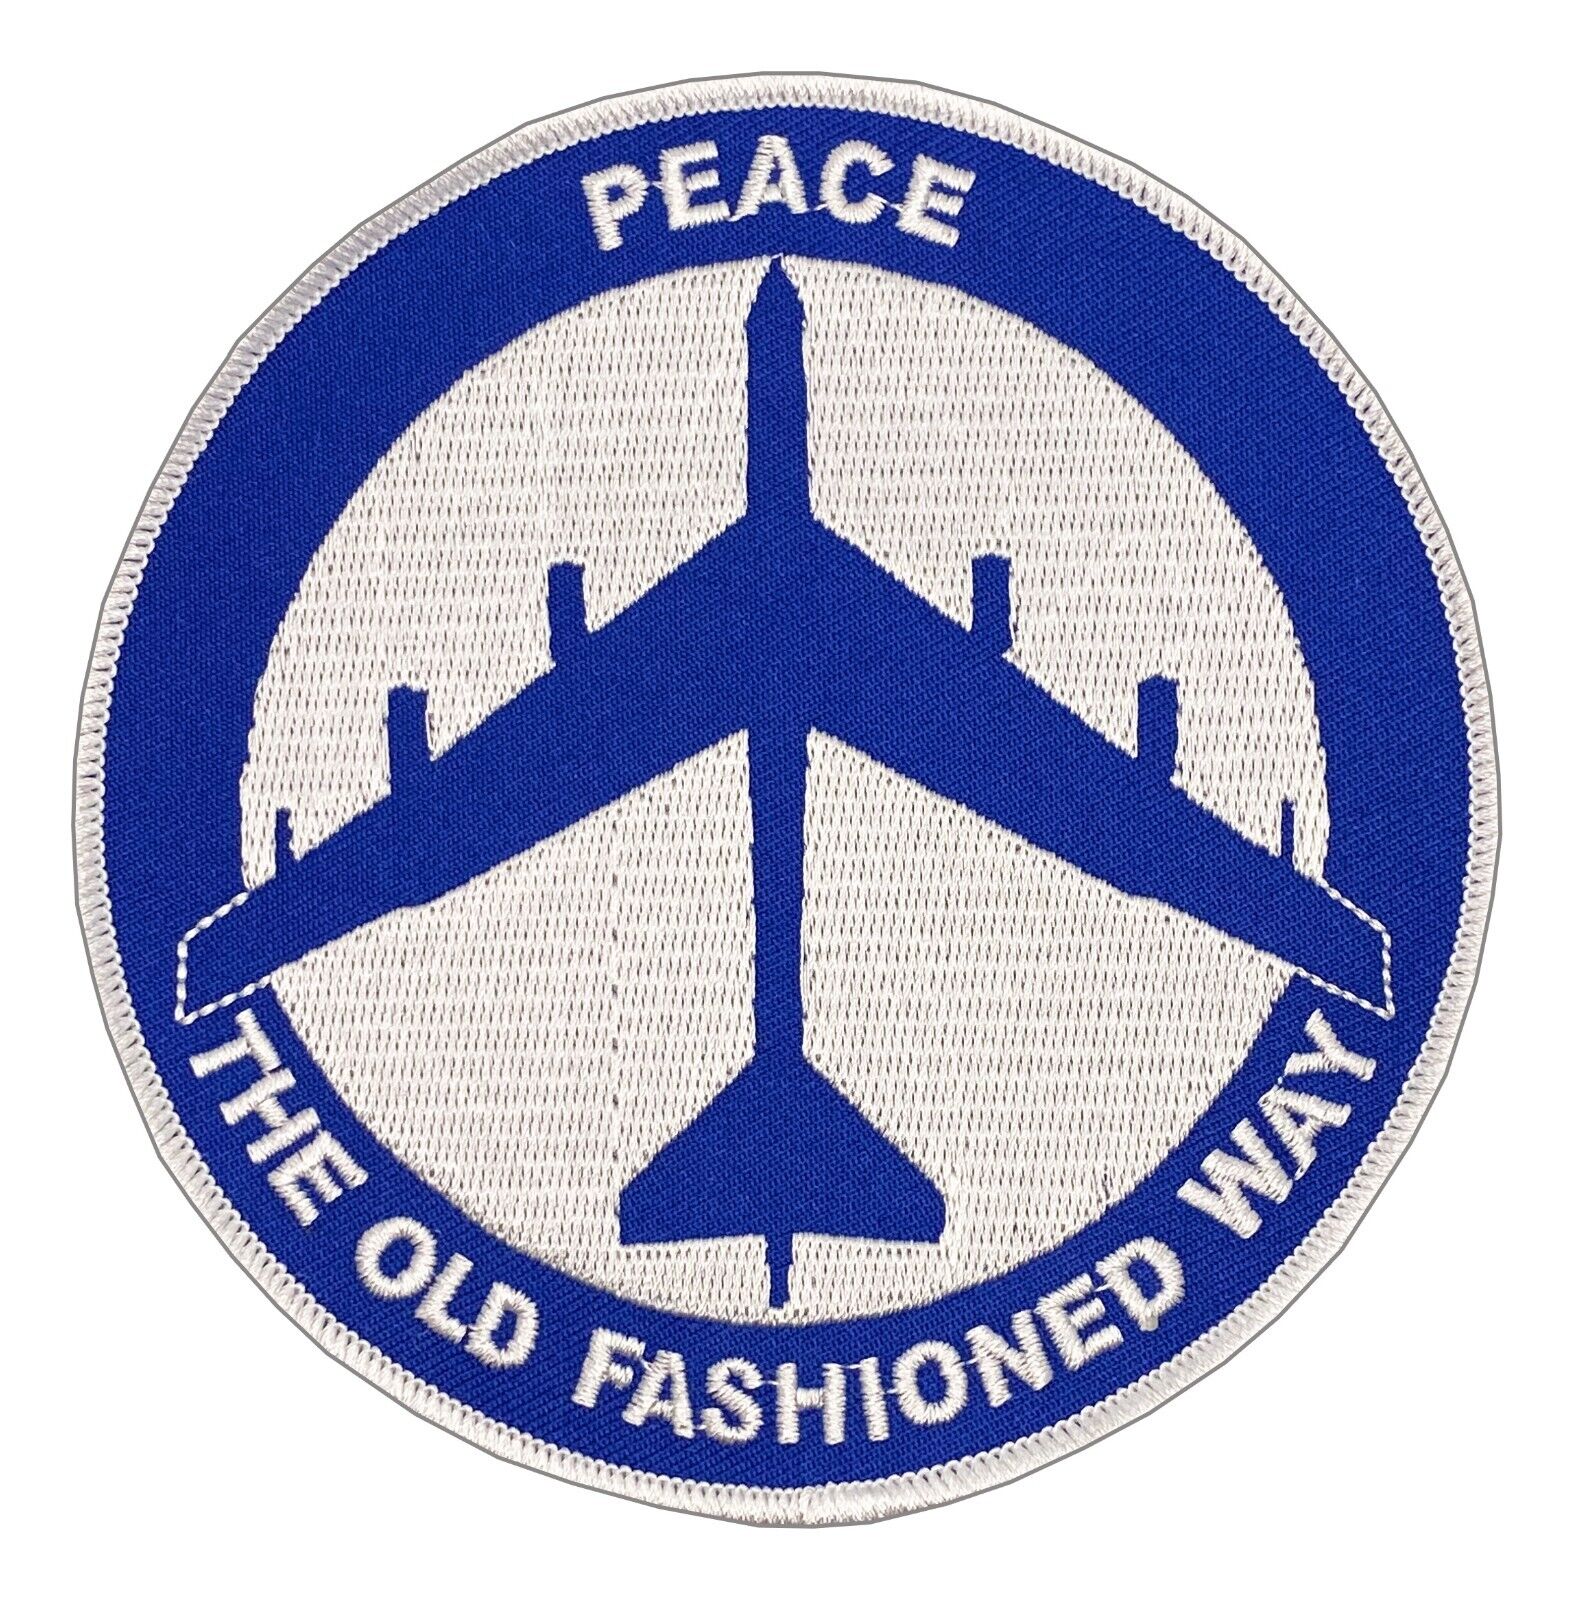 Peace - The Old Fashioned Way embroidered patch - 4 1/2\